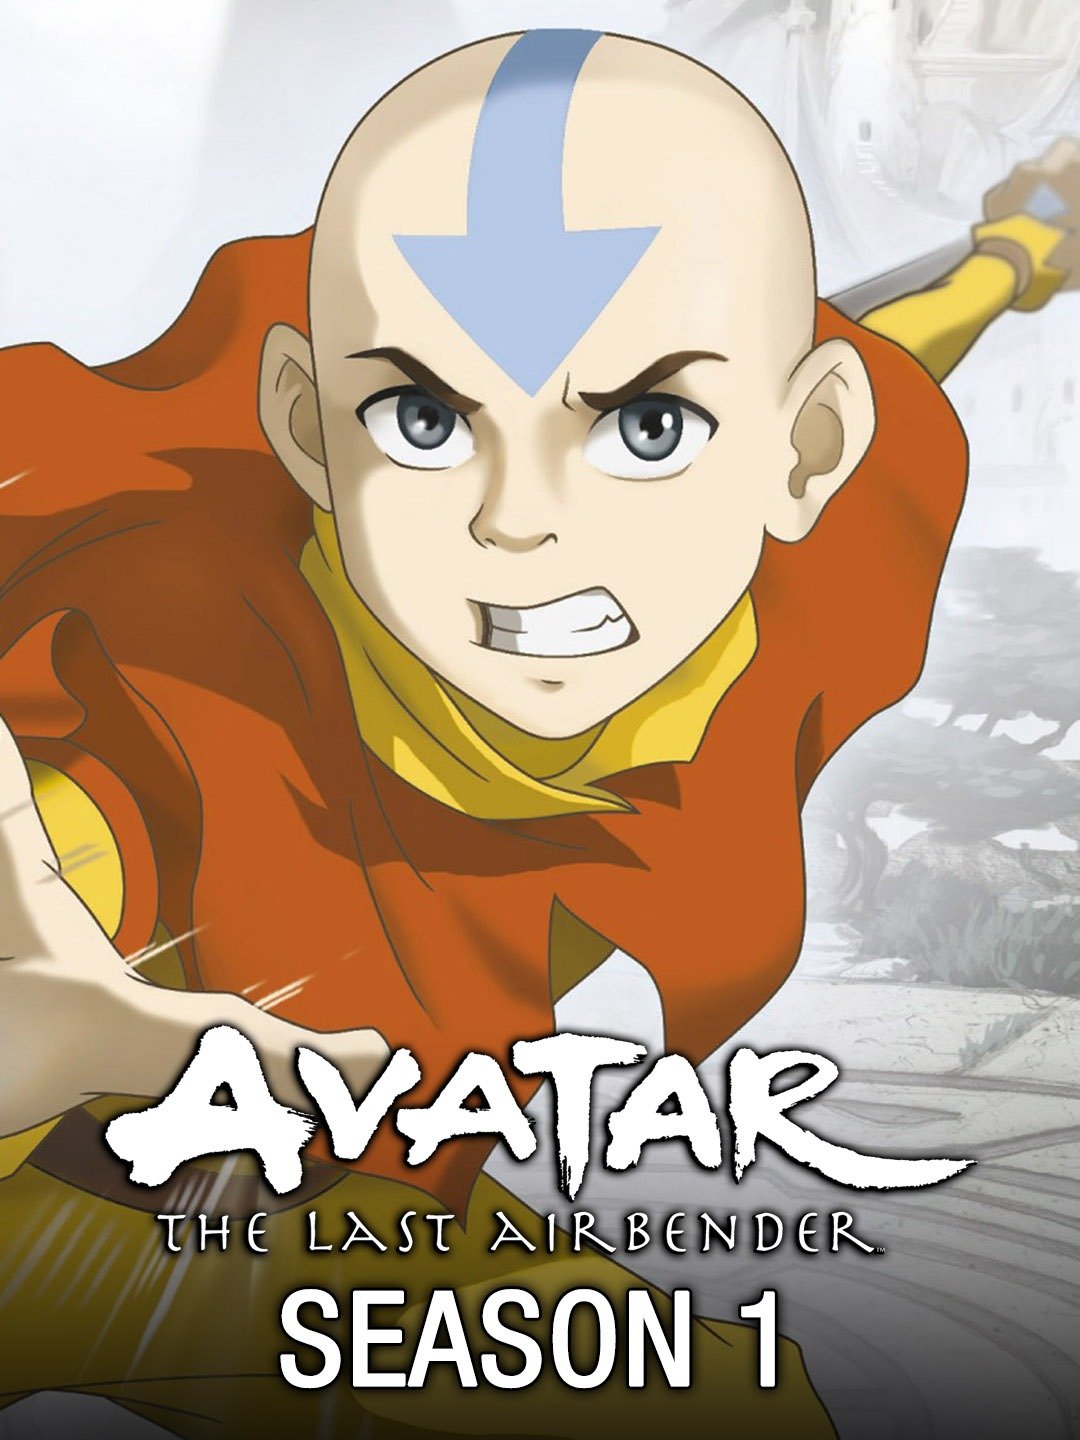 RELEASE DATE July 1 2010 MOVIE TITLE The Last Airbender aka Avatar The Last  Airbender STUDIO Paramount Pictures DIRECTOR M Night Shyamalan PLOT The  story follows the adventures of Aang a young